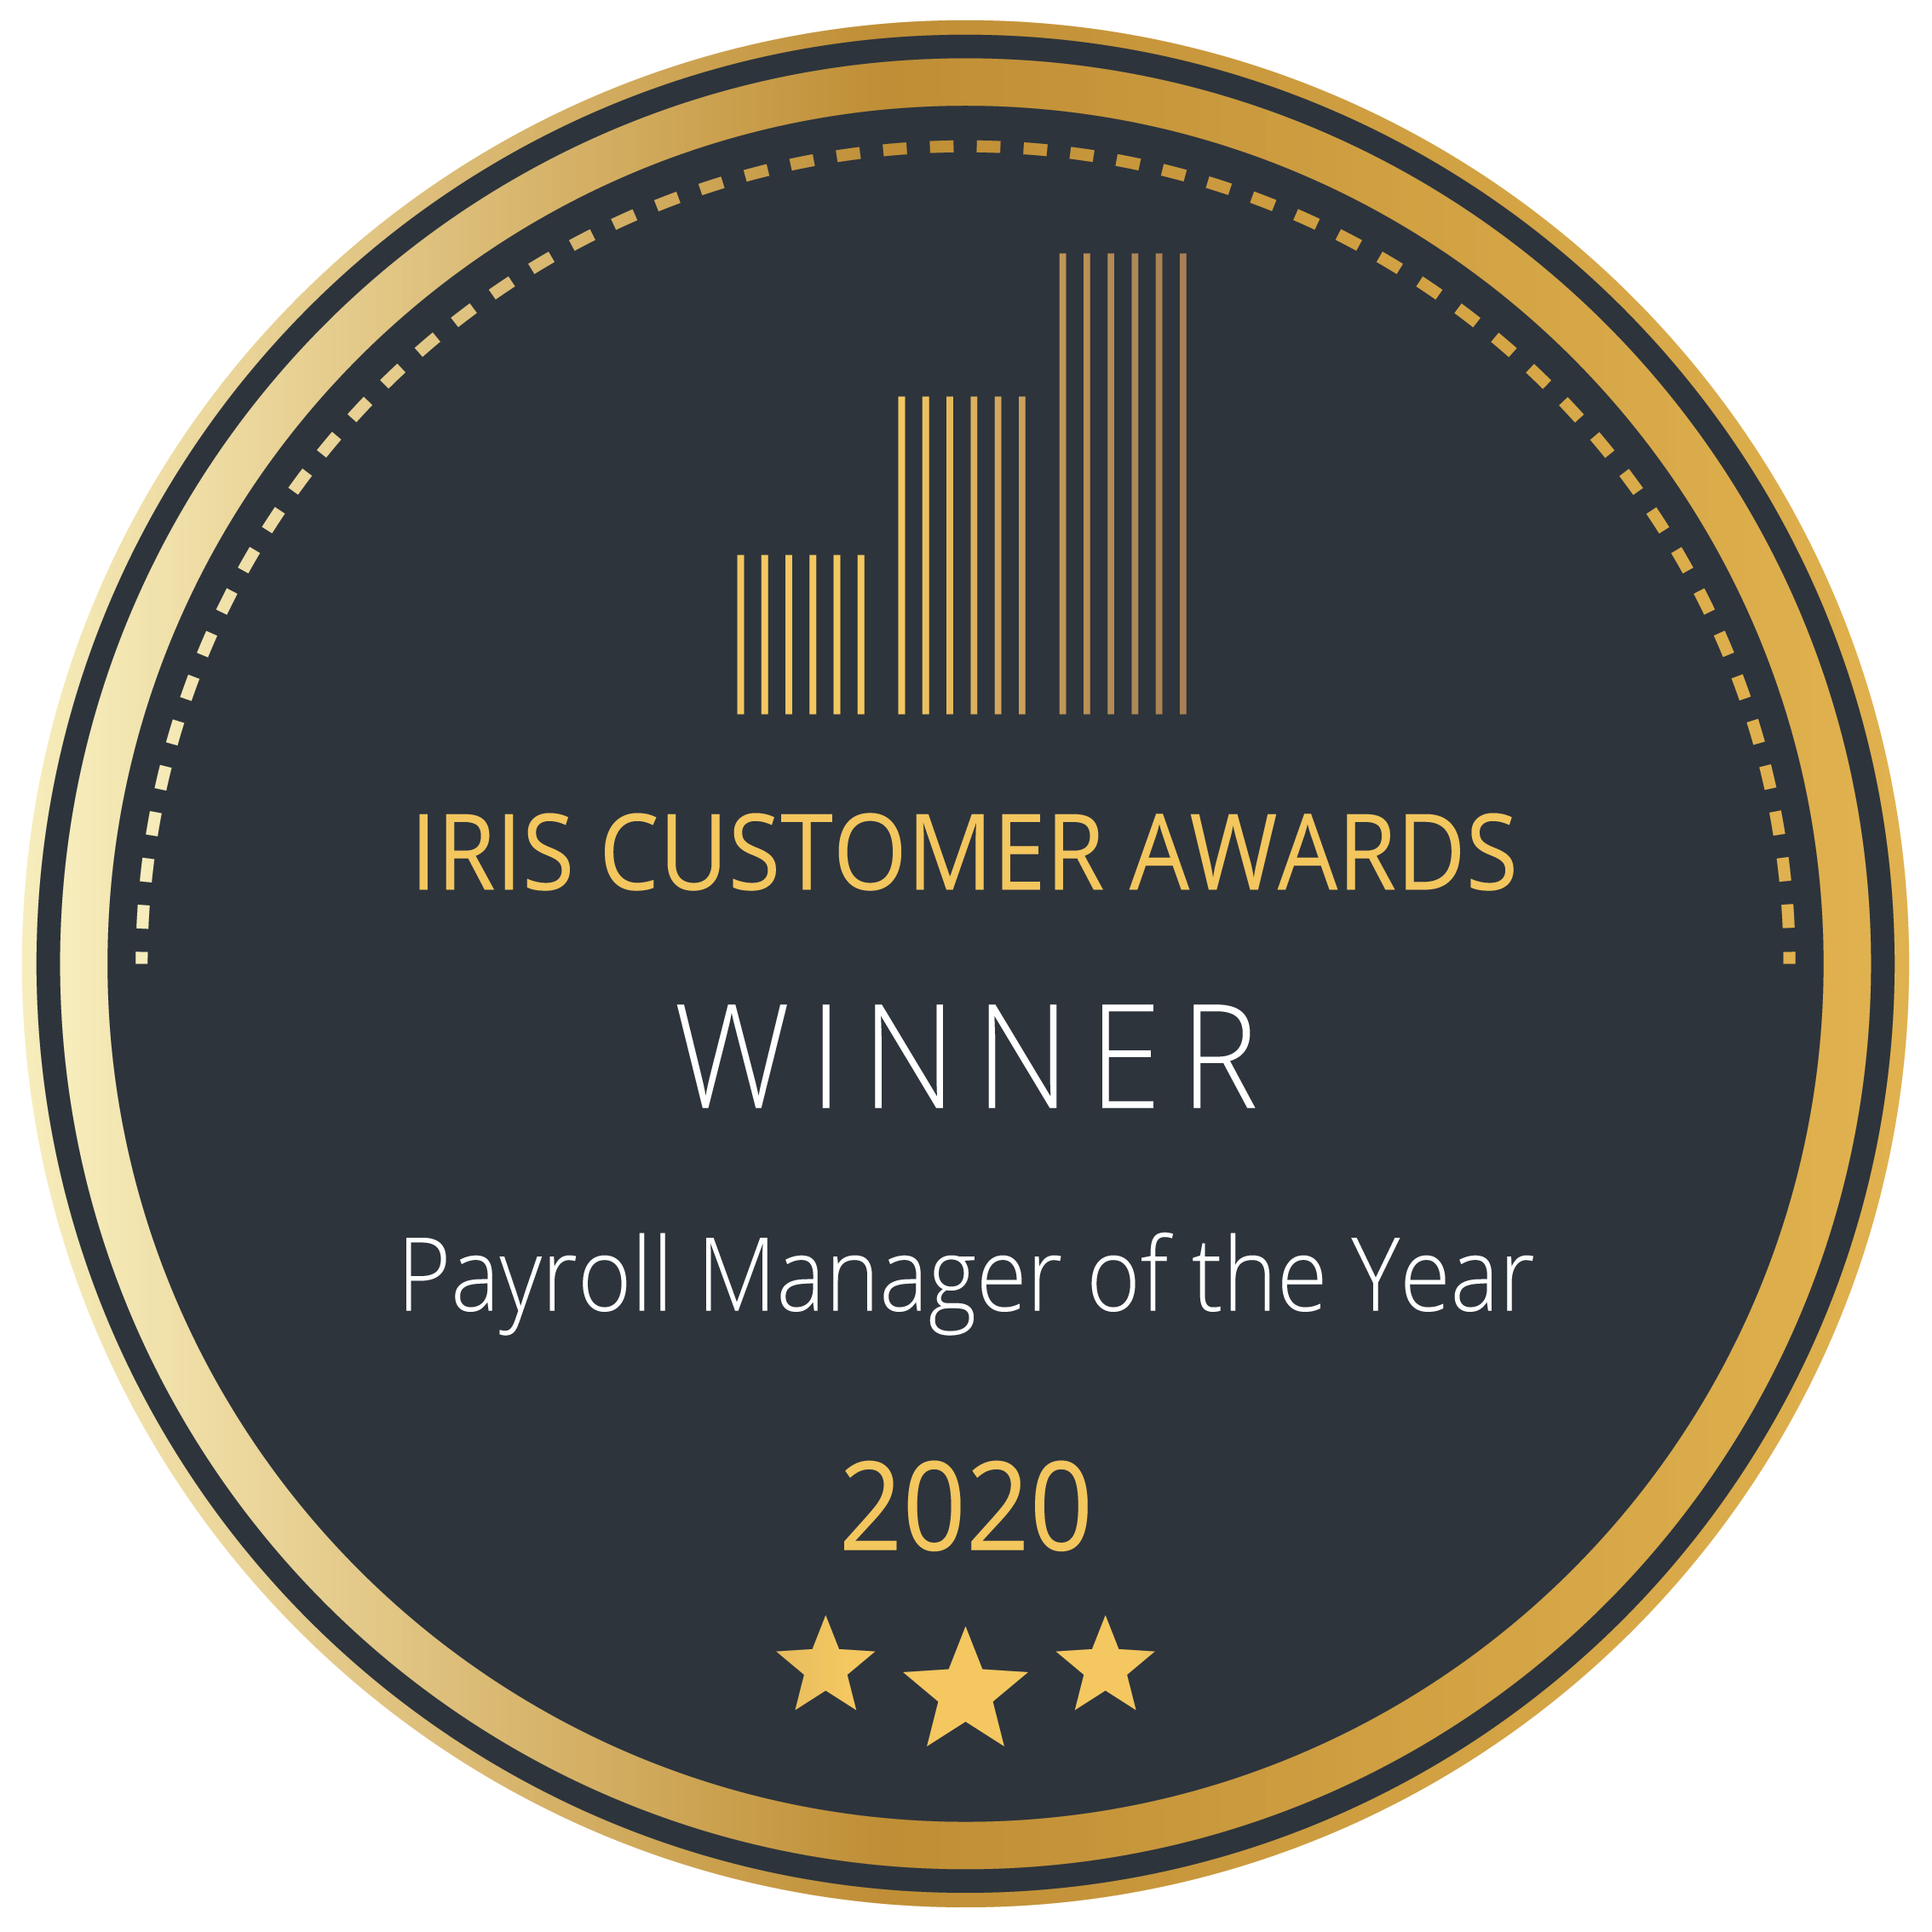 Winner - Payroll Manager of the Year 2020